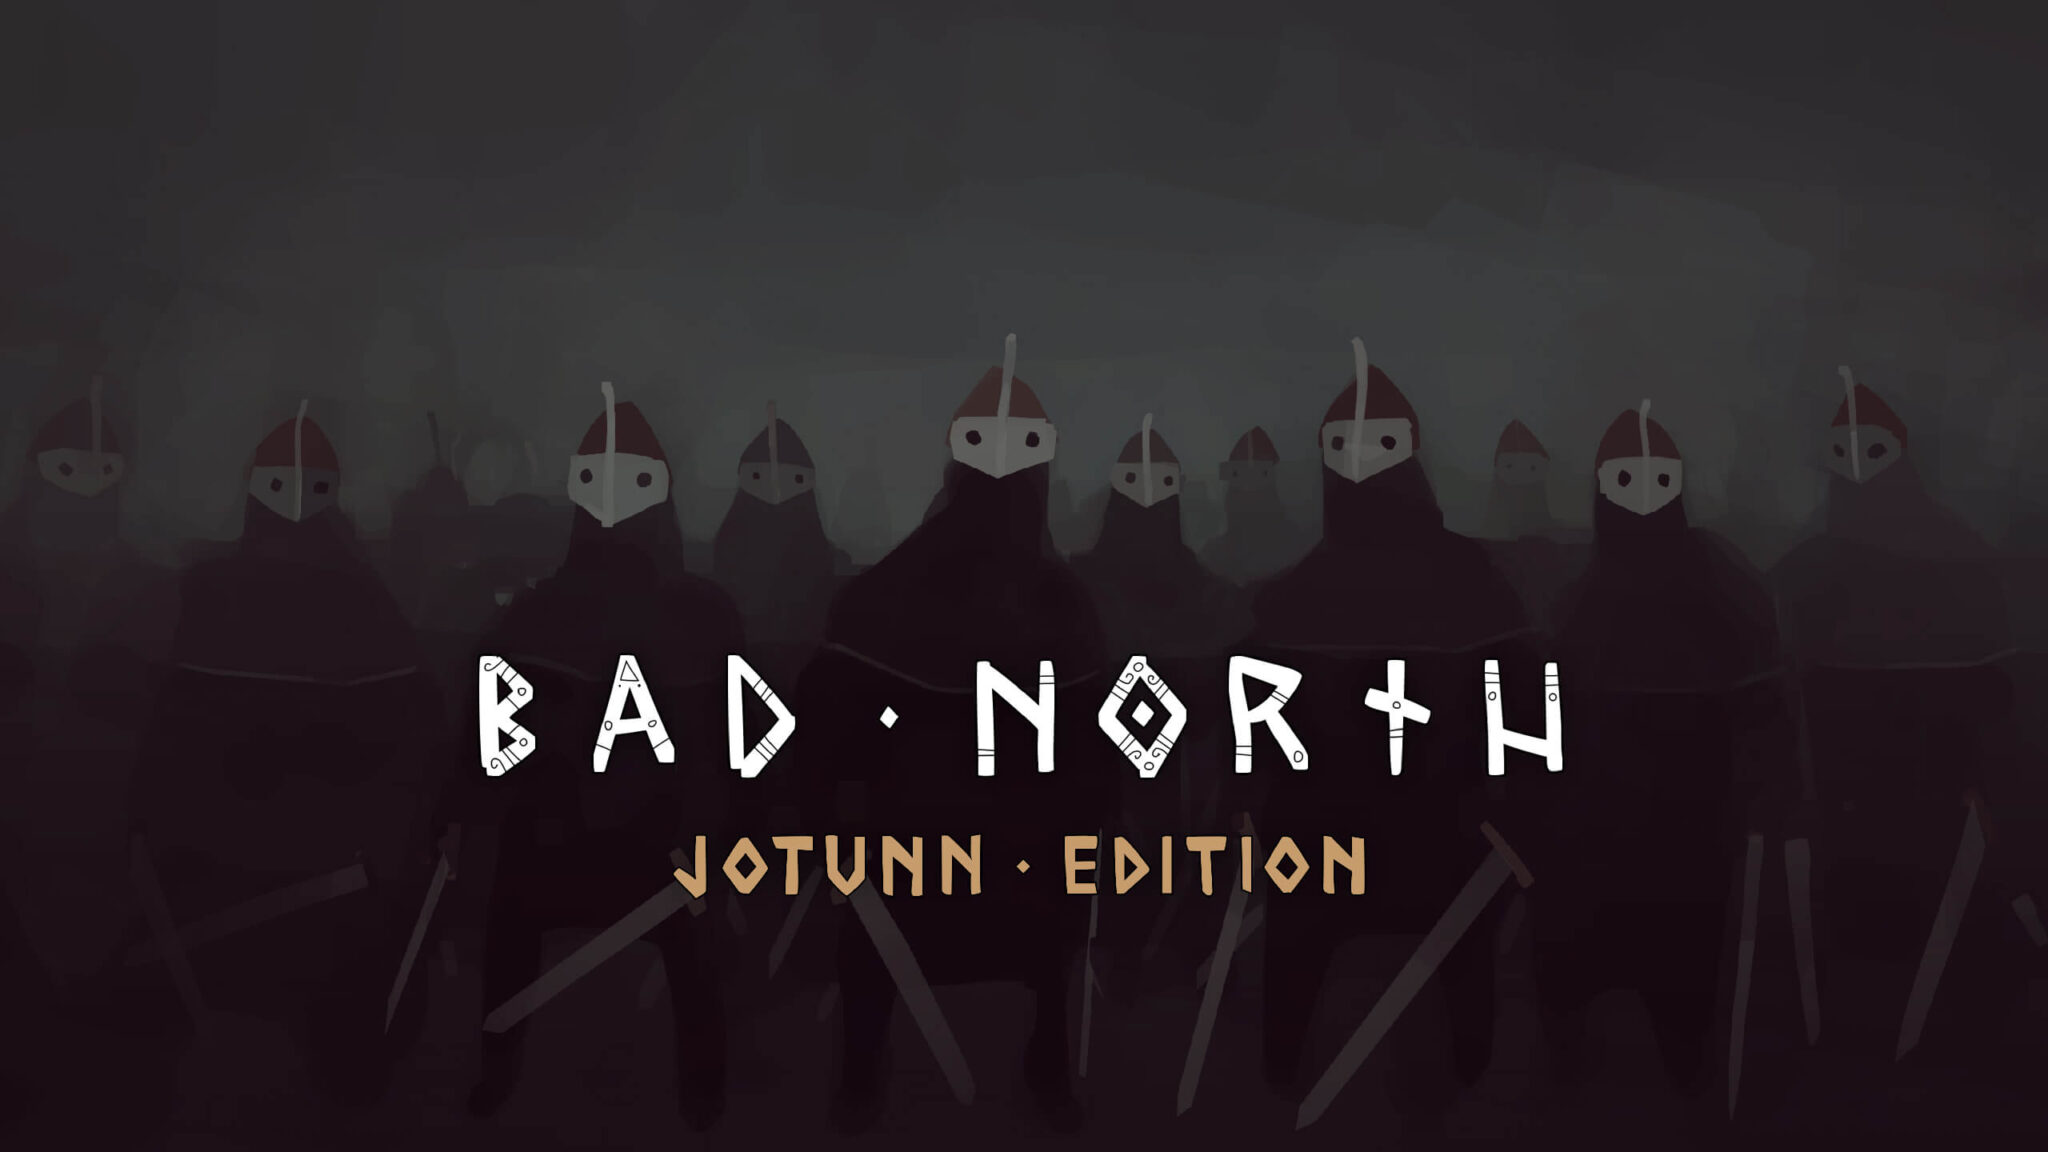 Bad north jotunn edition review / analise | jogo para pc grtis bad north jotunn edition epic store scaled | married games análises | bad